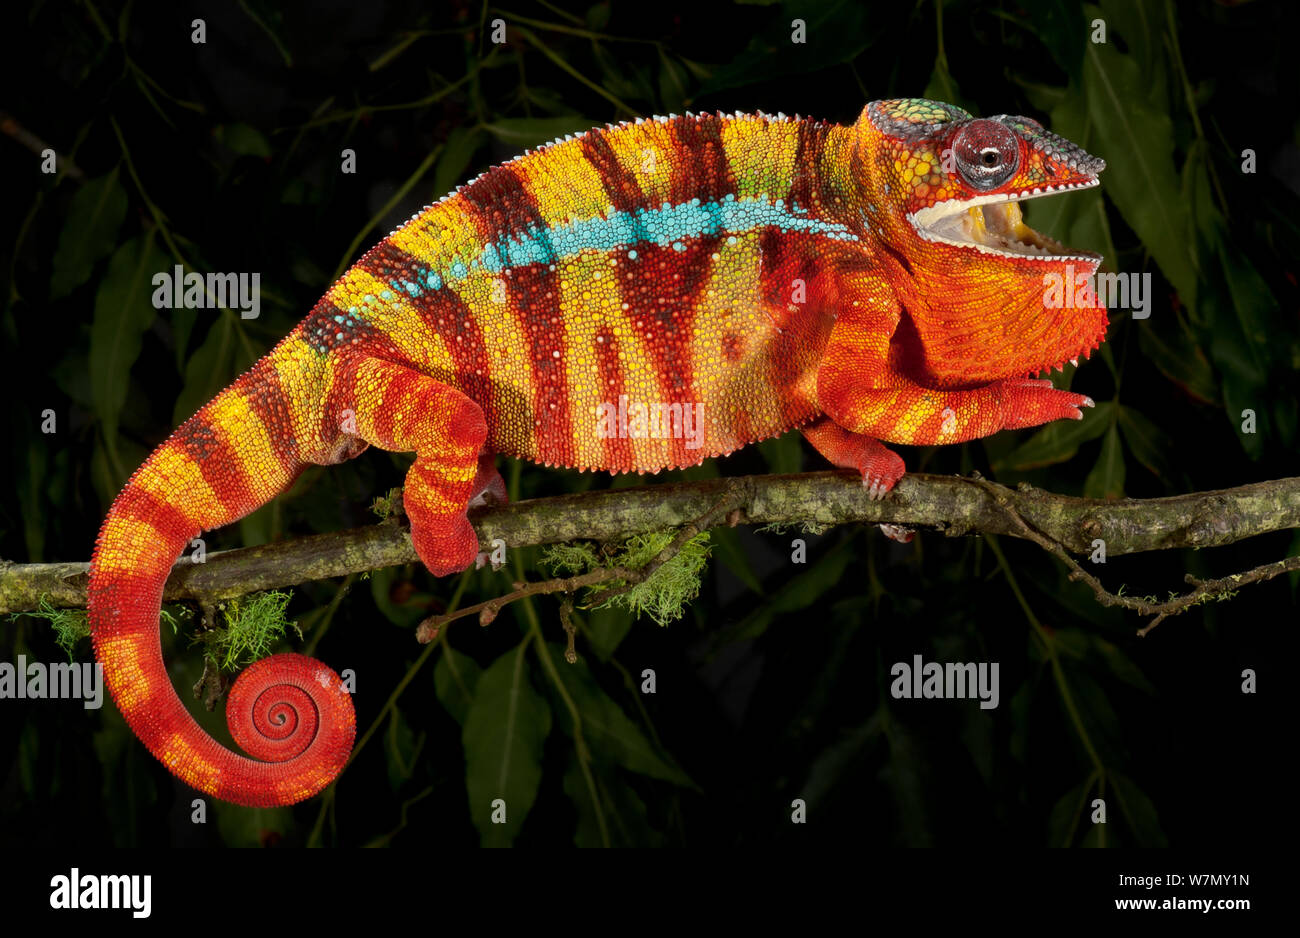 Panther chameleon (Furcifer pardalis) striped red, yellow and blue, walking along branch, captive, from Madagascar Stock Photo